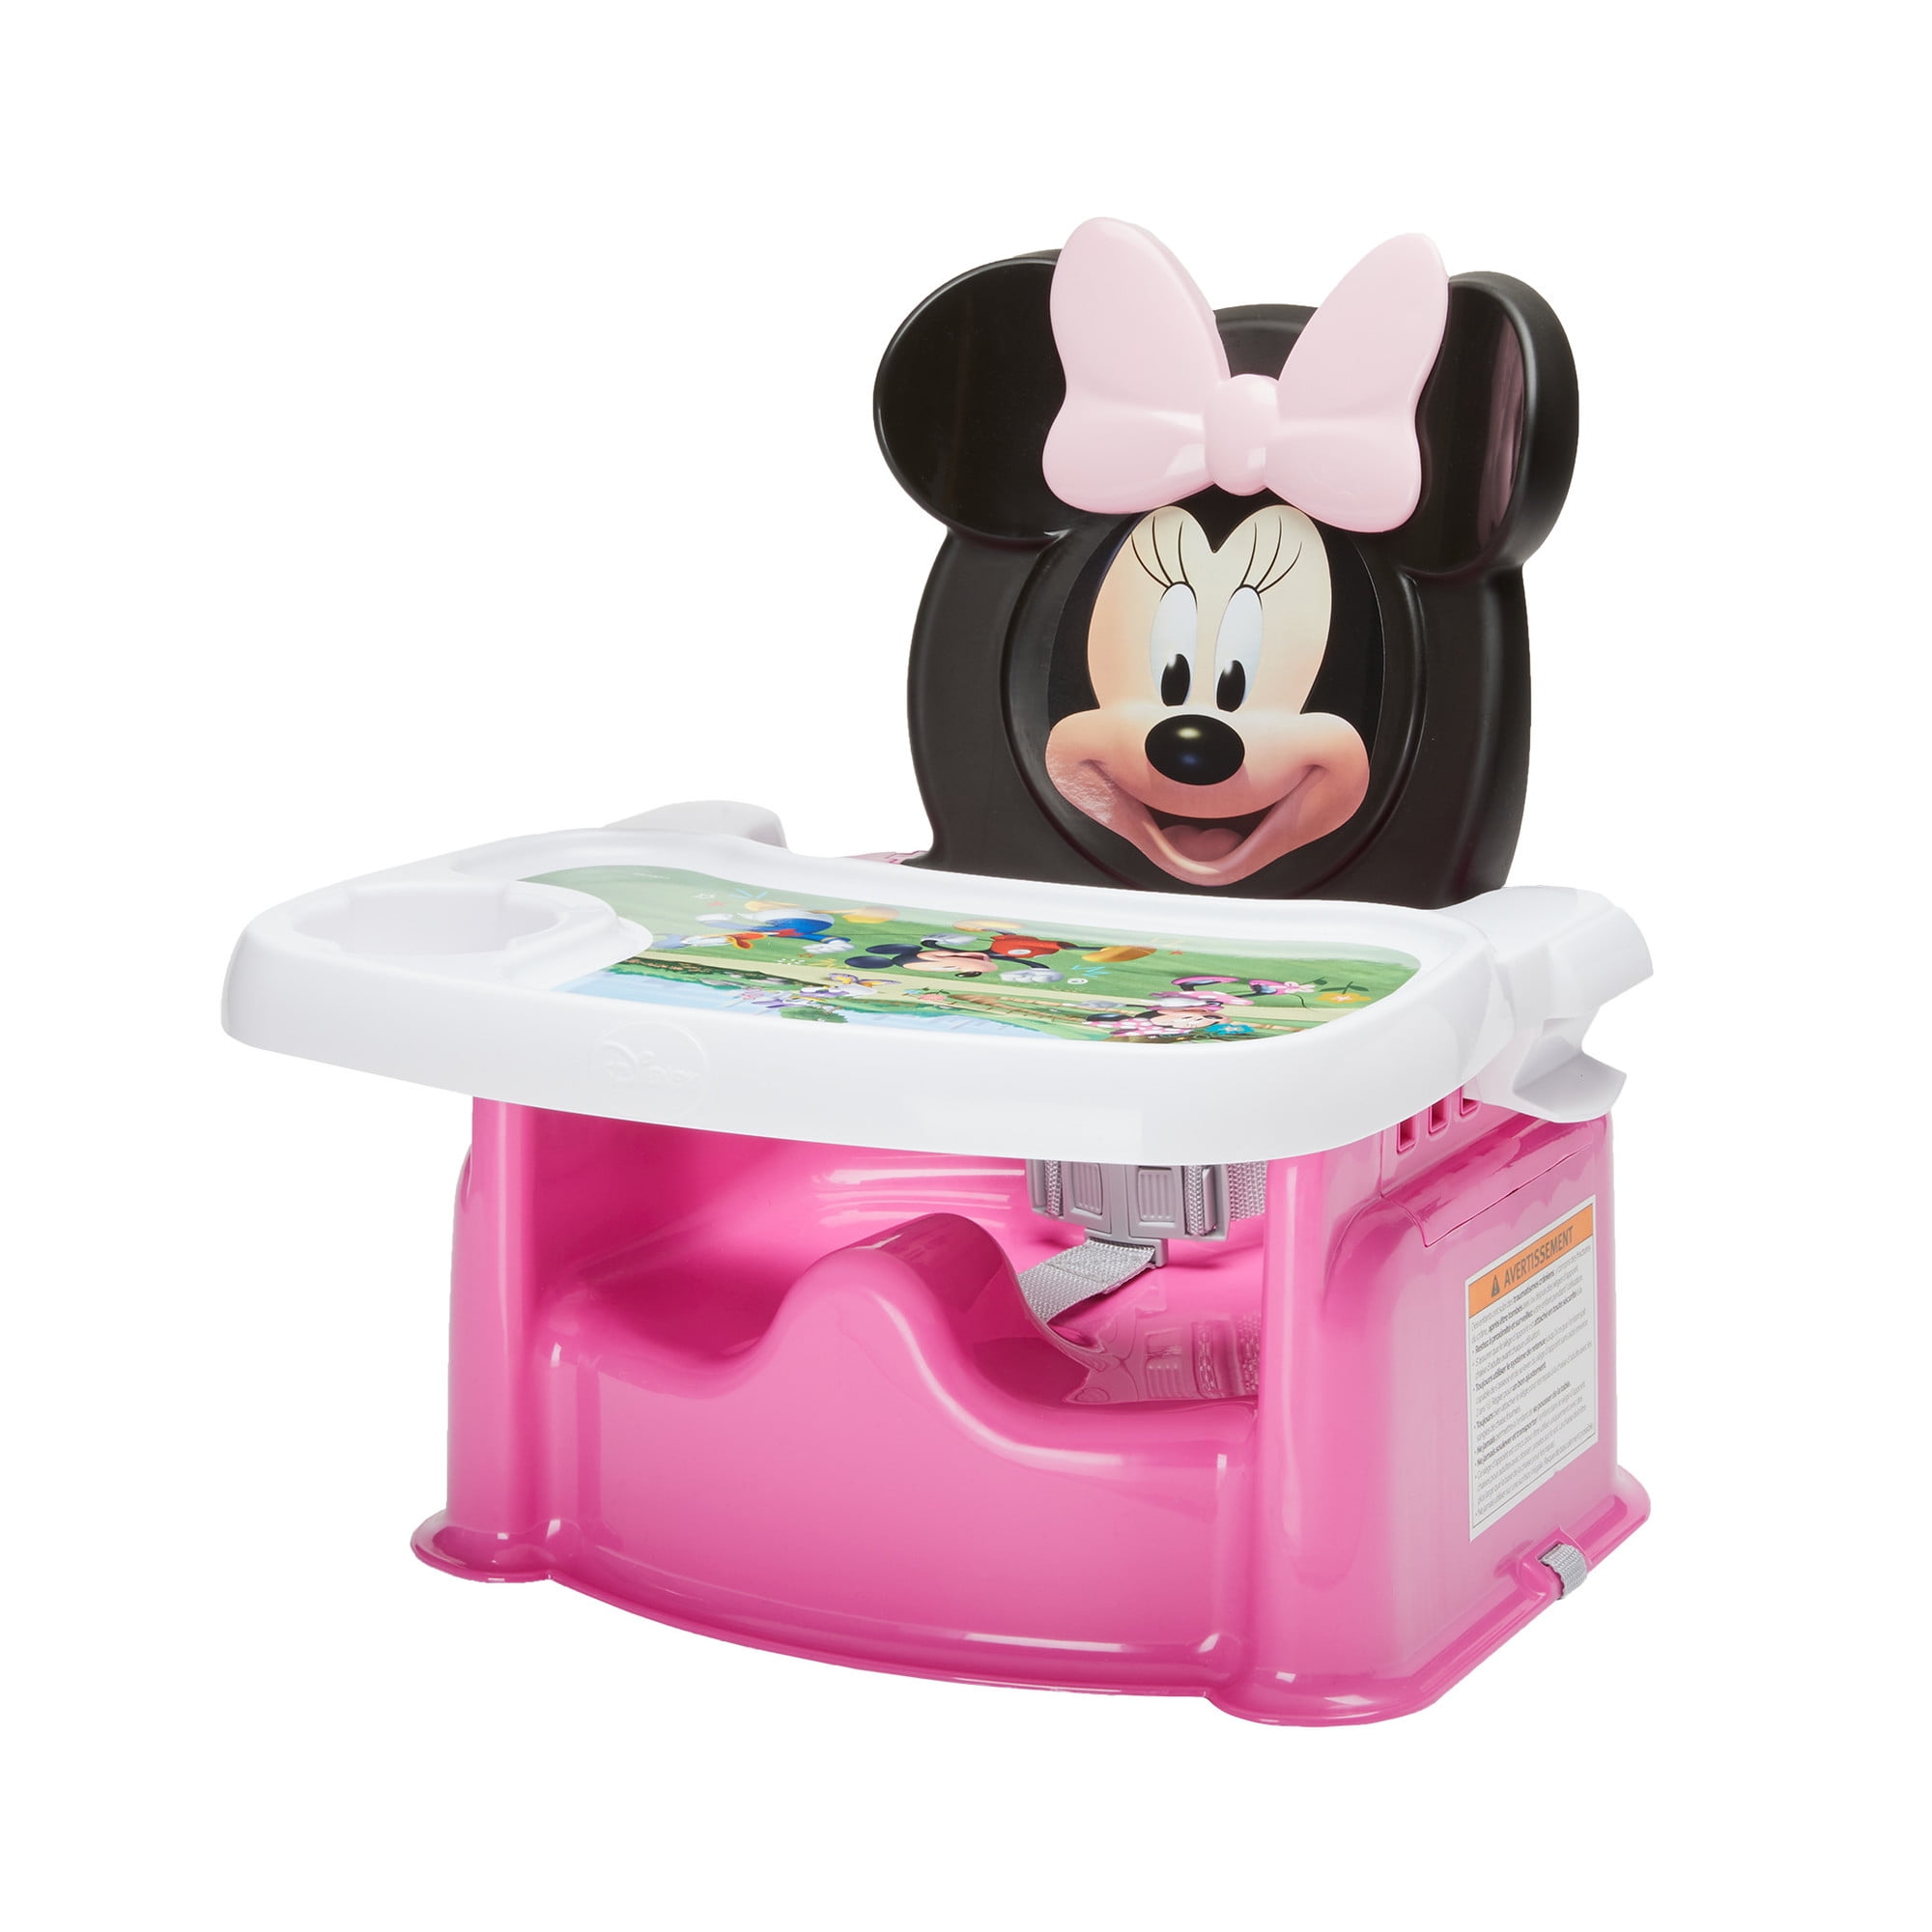 booster seat with tray walmart